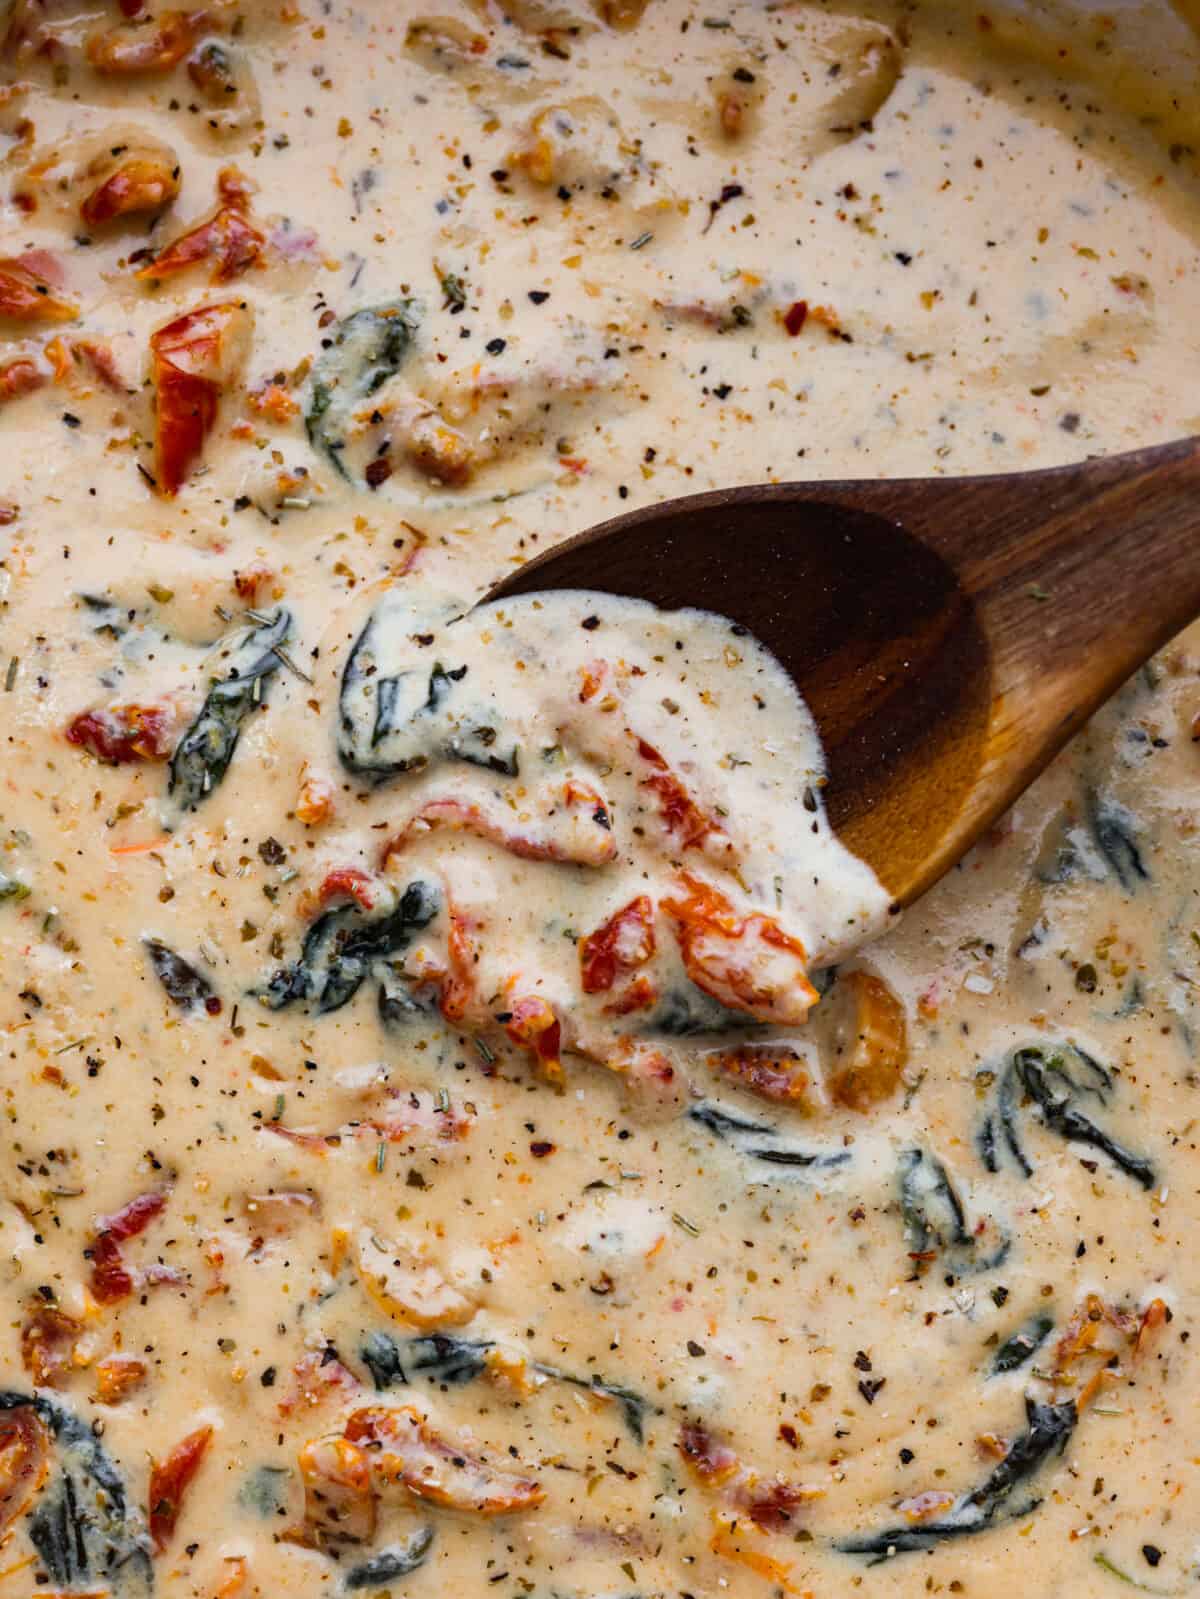 Mixing creamy Tuscan garlic sauce with a wooden spoon.